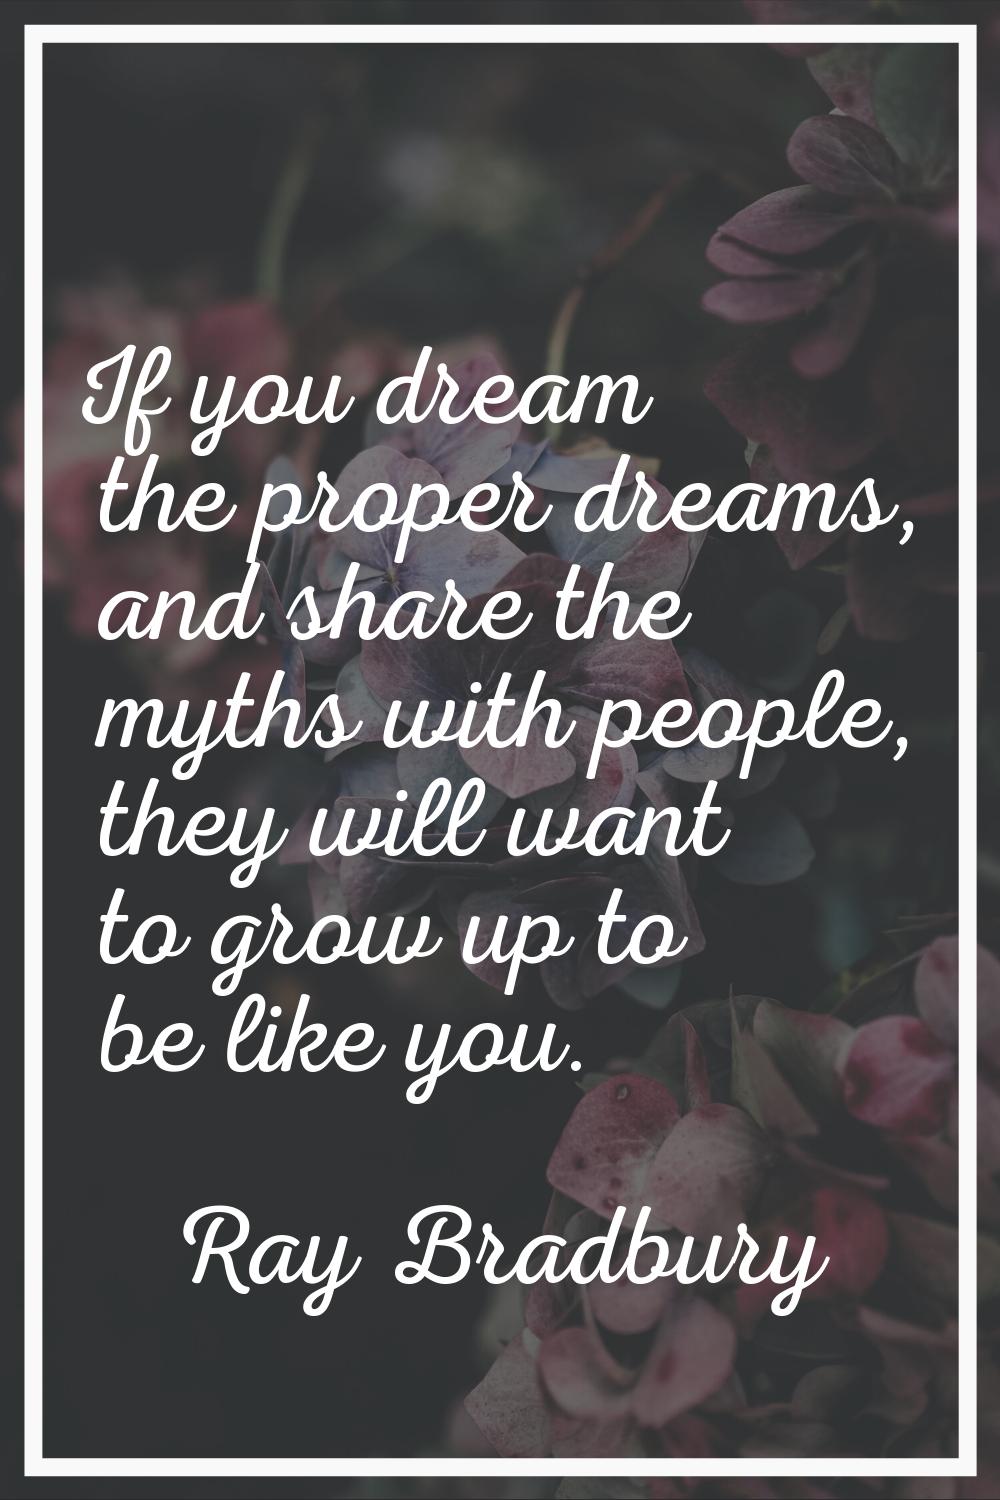 If you dream the proper dreams, and share the myths with people, they will want to grow up to be li